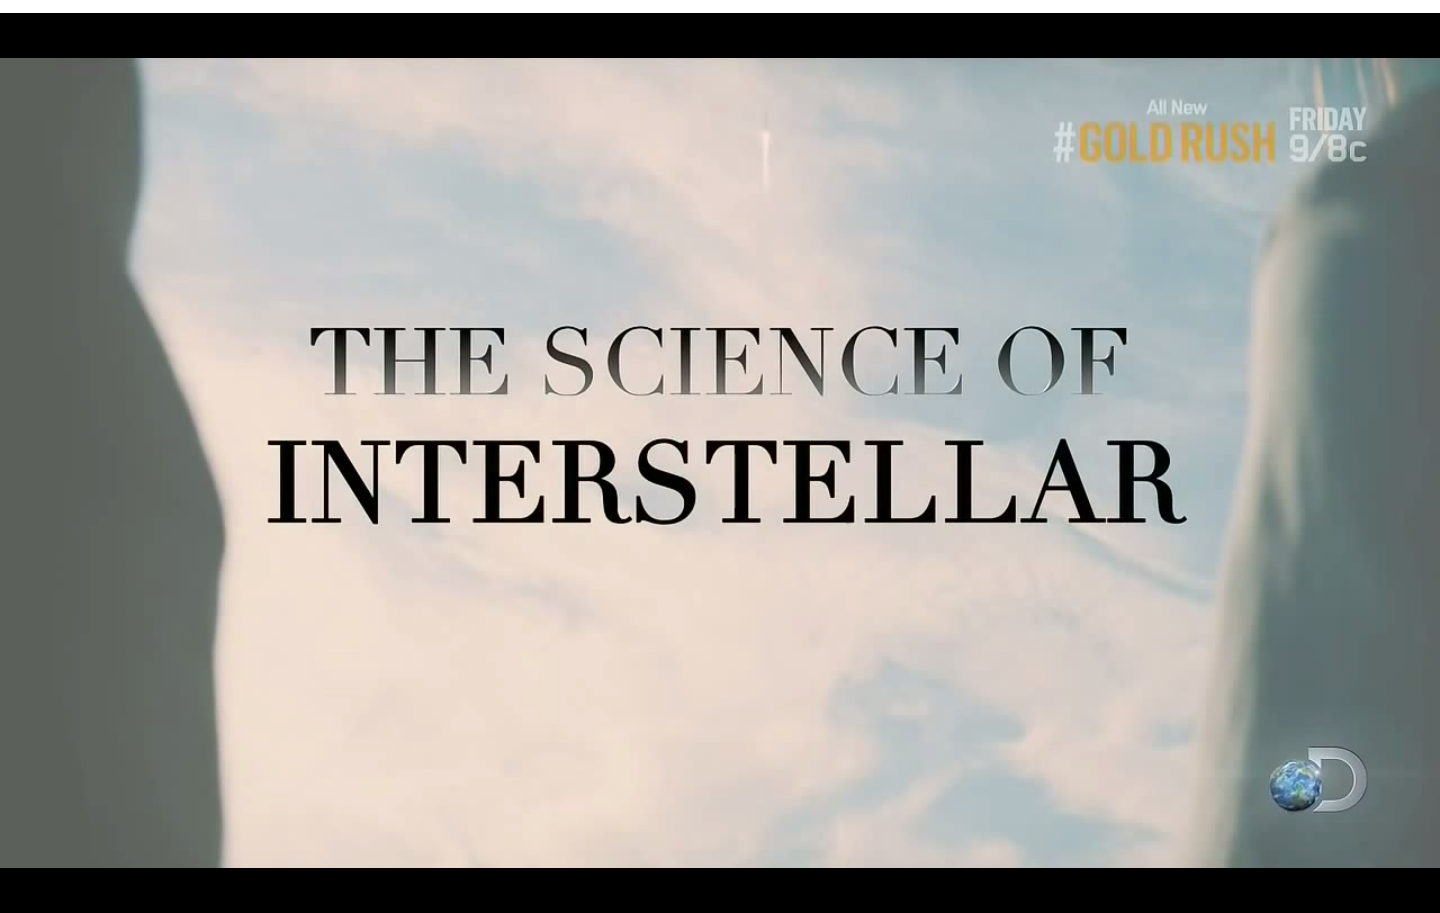 My Footage from the South Pole used in “The Science of Interstellar” Documentary